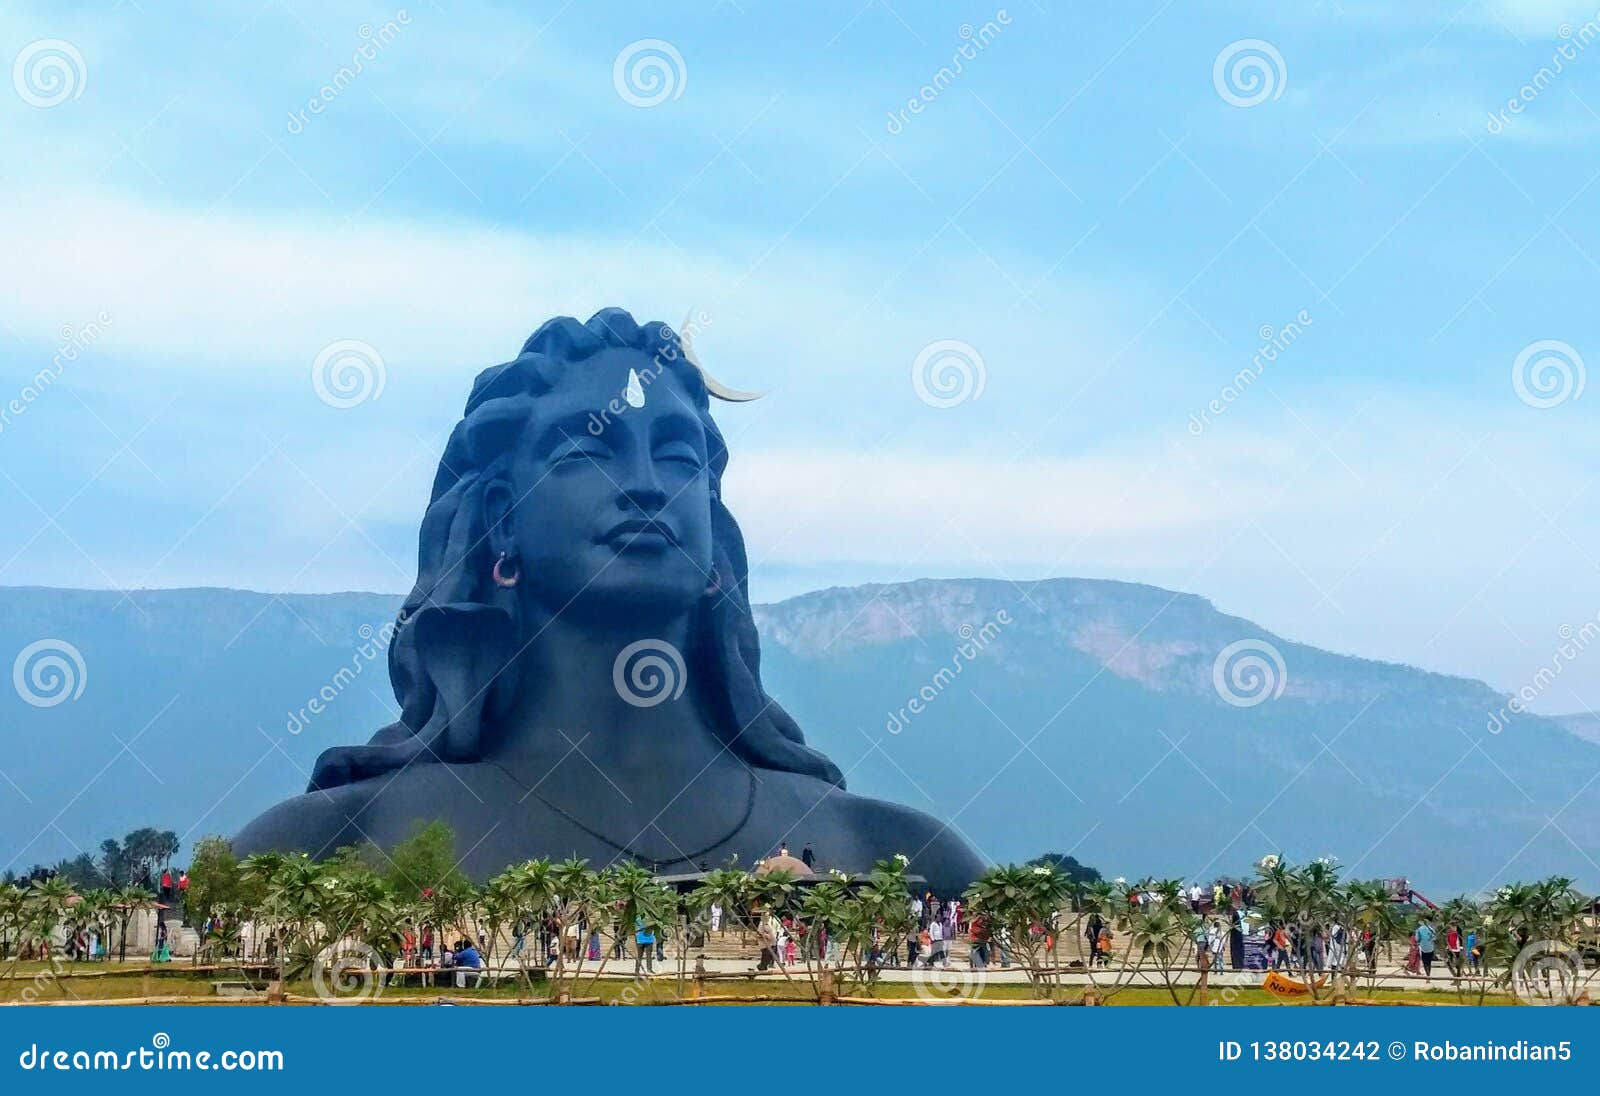 140 Shiv Prayer Photos Free Royalty Free Stock Photos From Dreamstime See more ideas about shiva, lord shiva, shiva statue. https www dreamstime com ooty shiva shiv prayer lord shiv ji worship adiyogi shiva statue coimbatore tamil nadu india image138034242